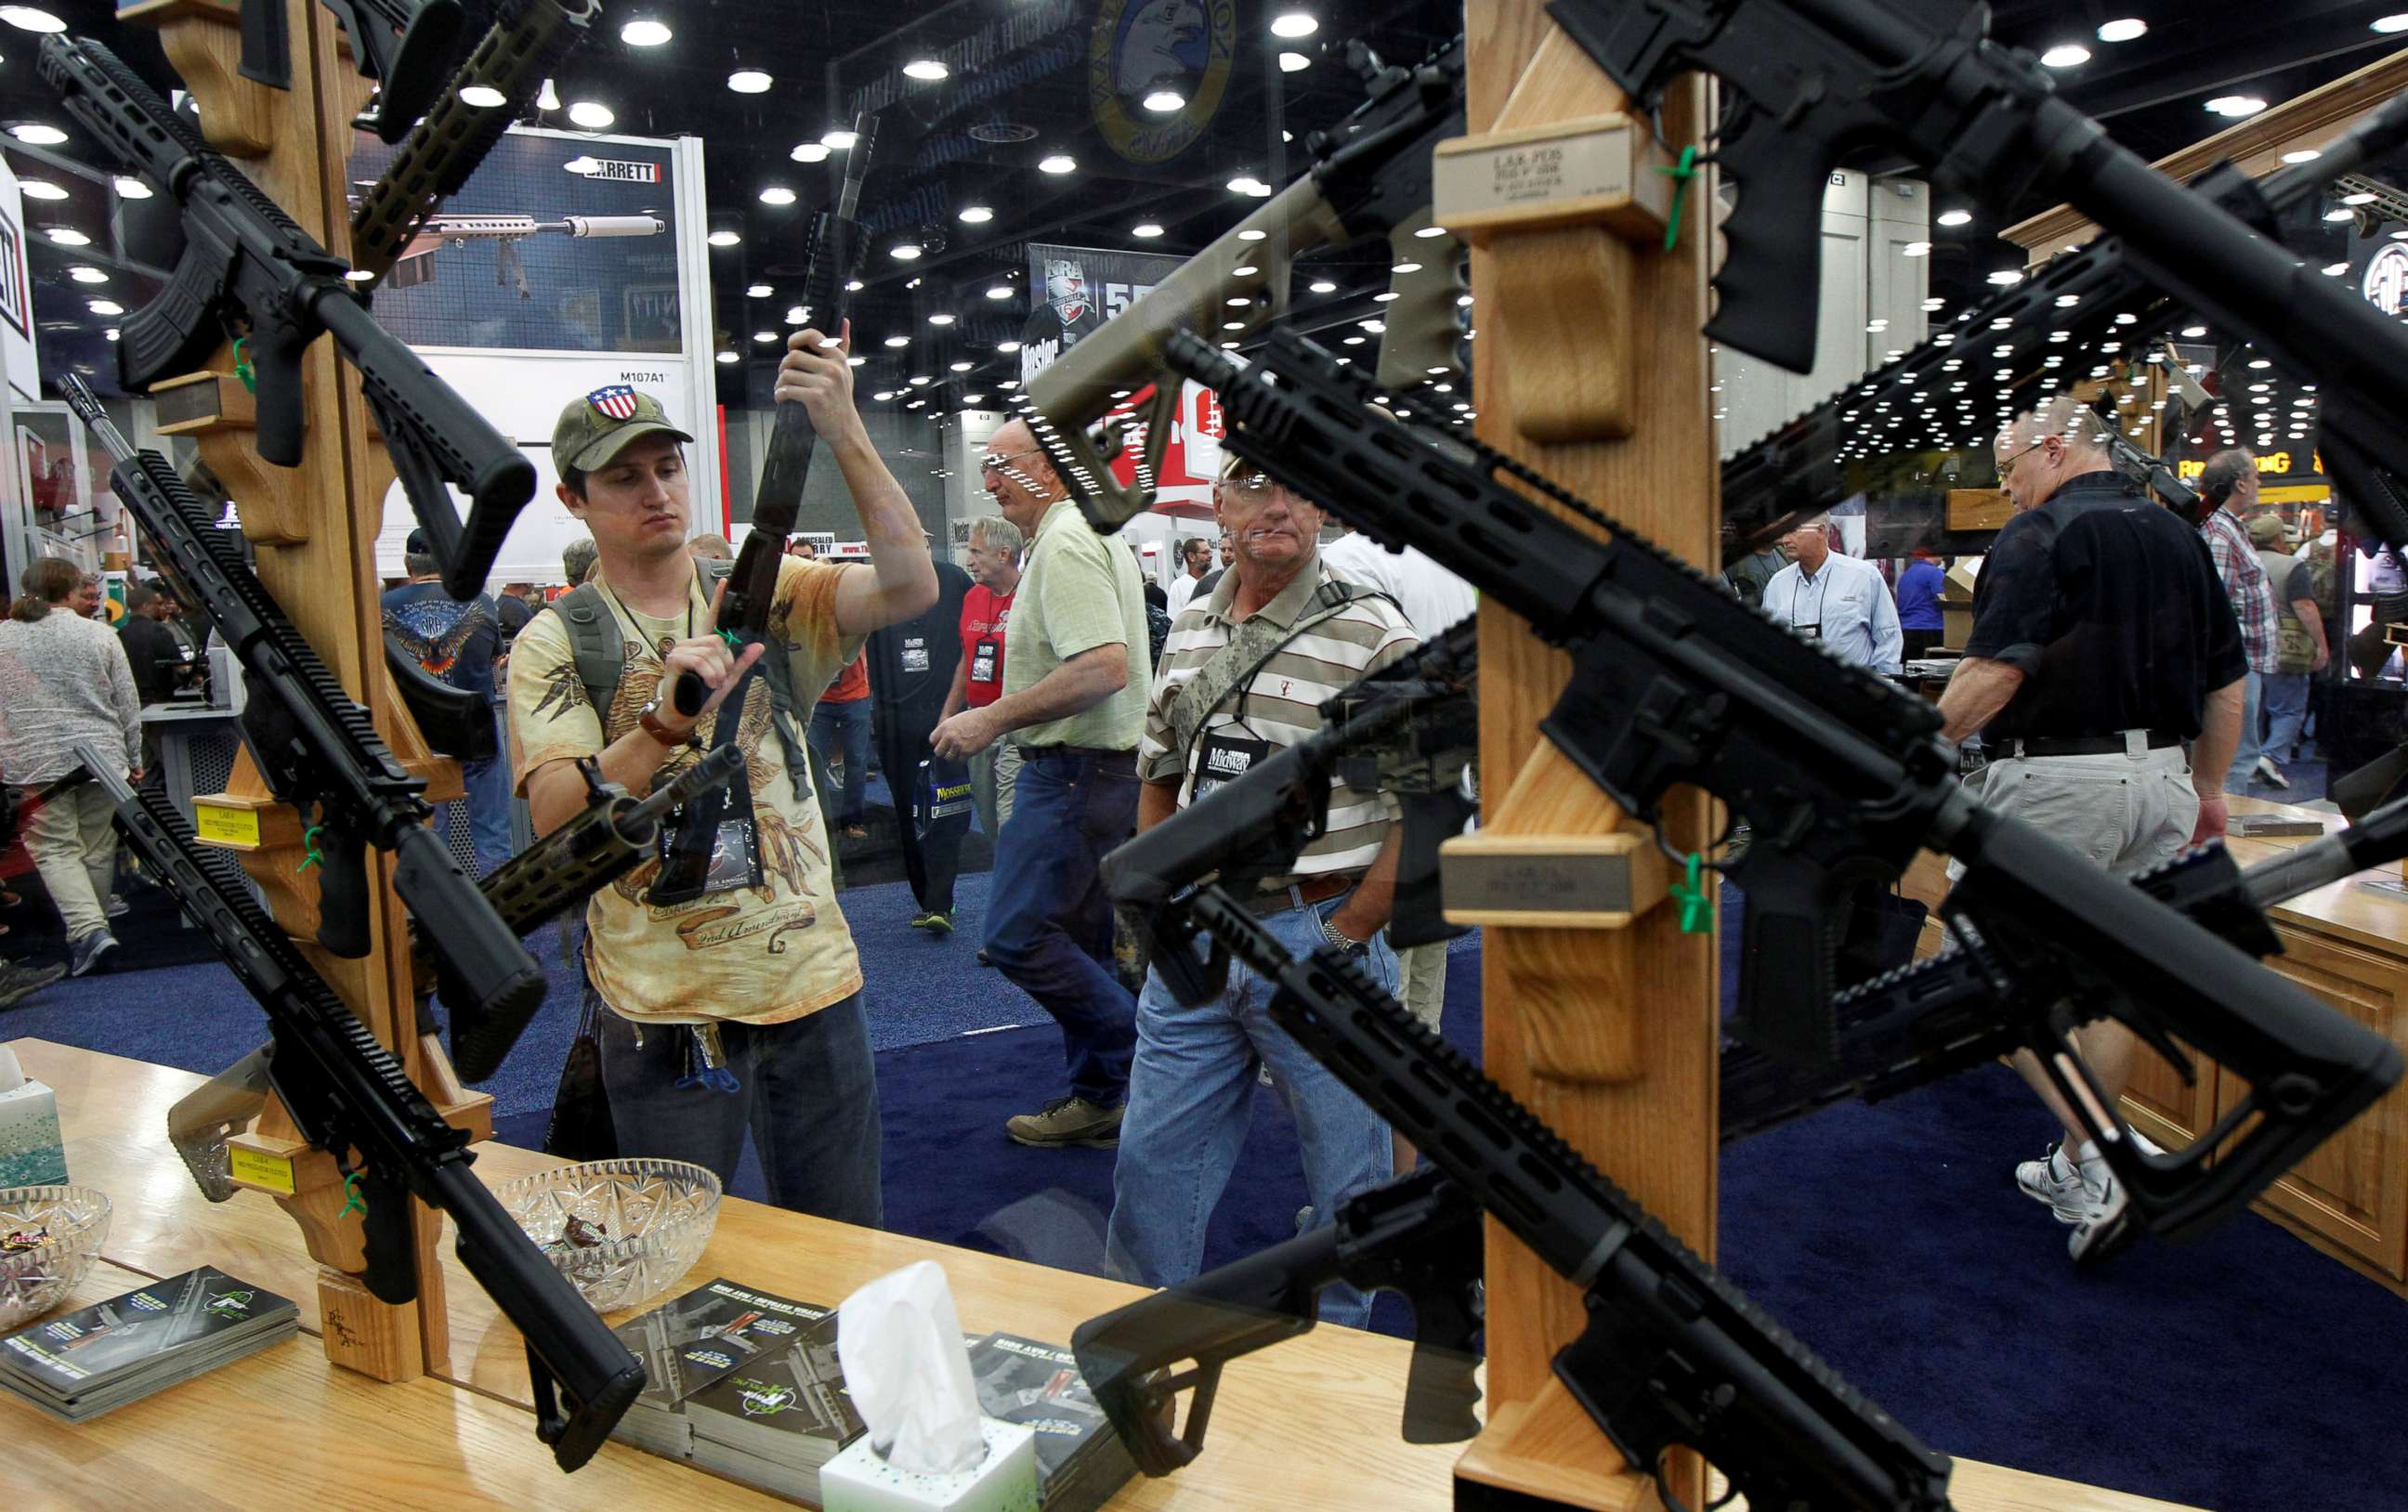 PHOTO: Gun enthusiasts look over Rock River Arms' guns at the National Rifle Association's (NRA) annual meetings and exhibits show in Louisville, Kentucky, May 21, 2016.